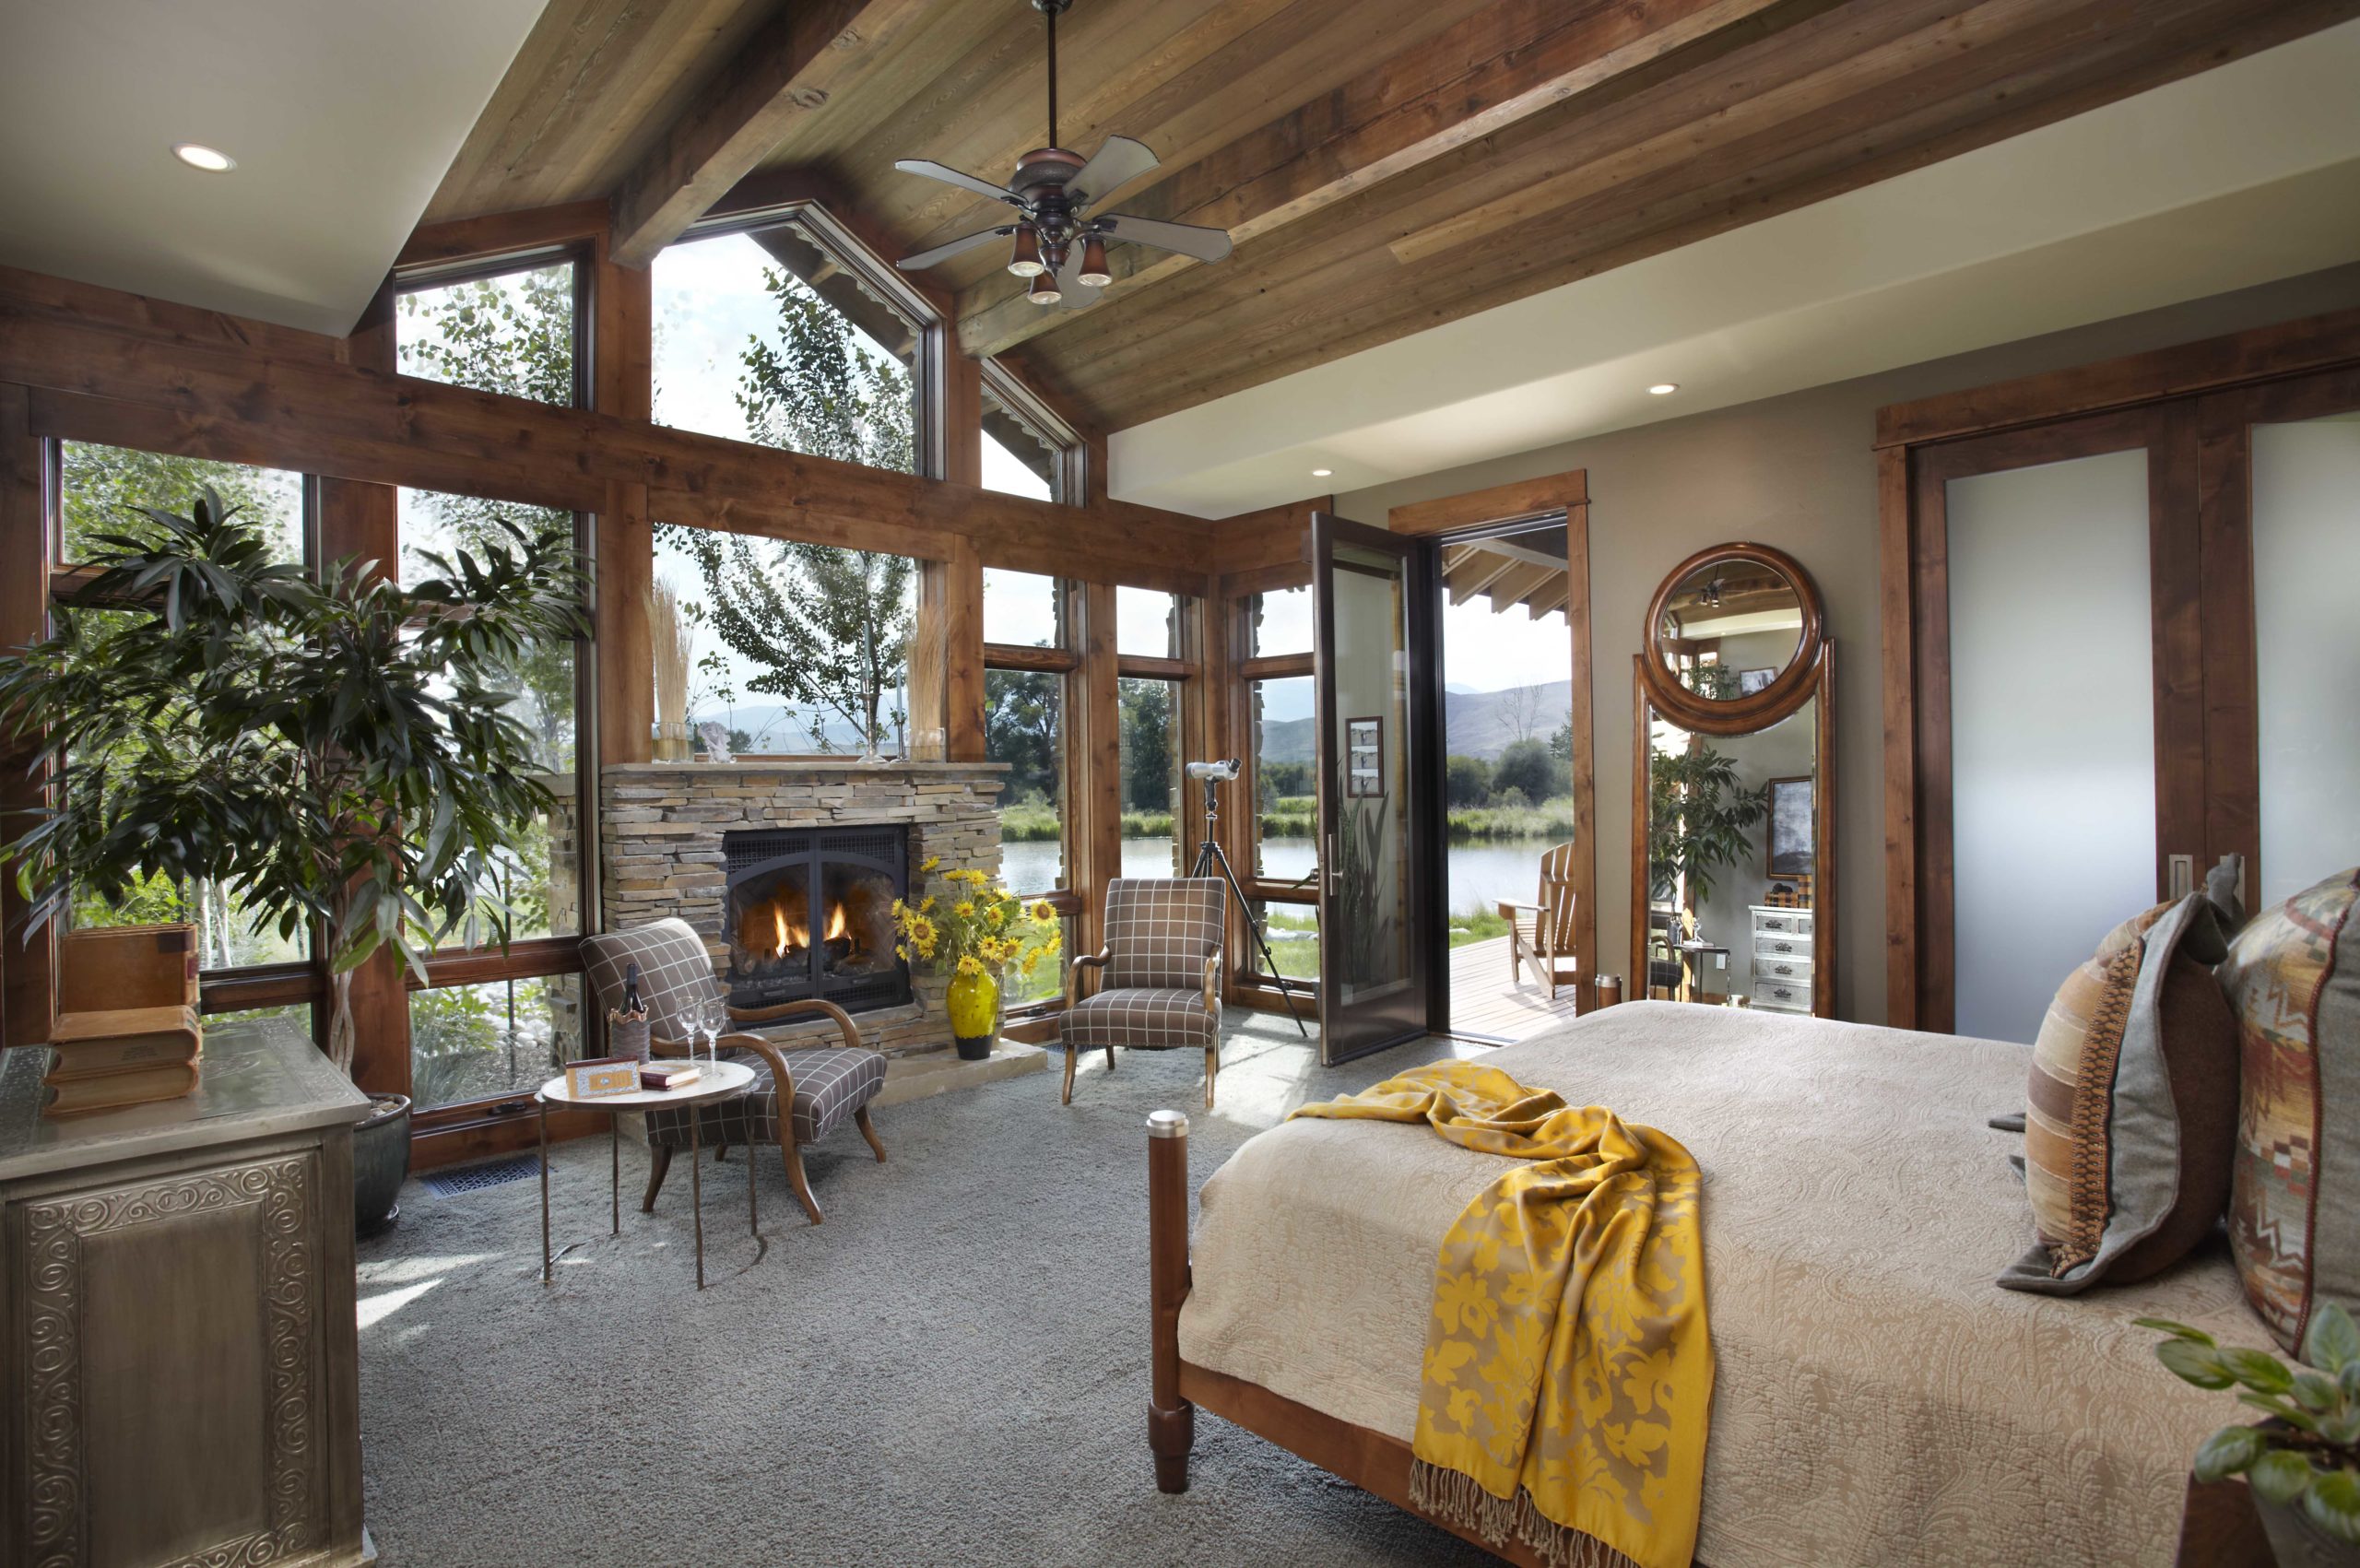 Bedroom with bed facing floor to ceiling windows overlooking a pond